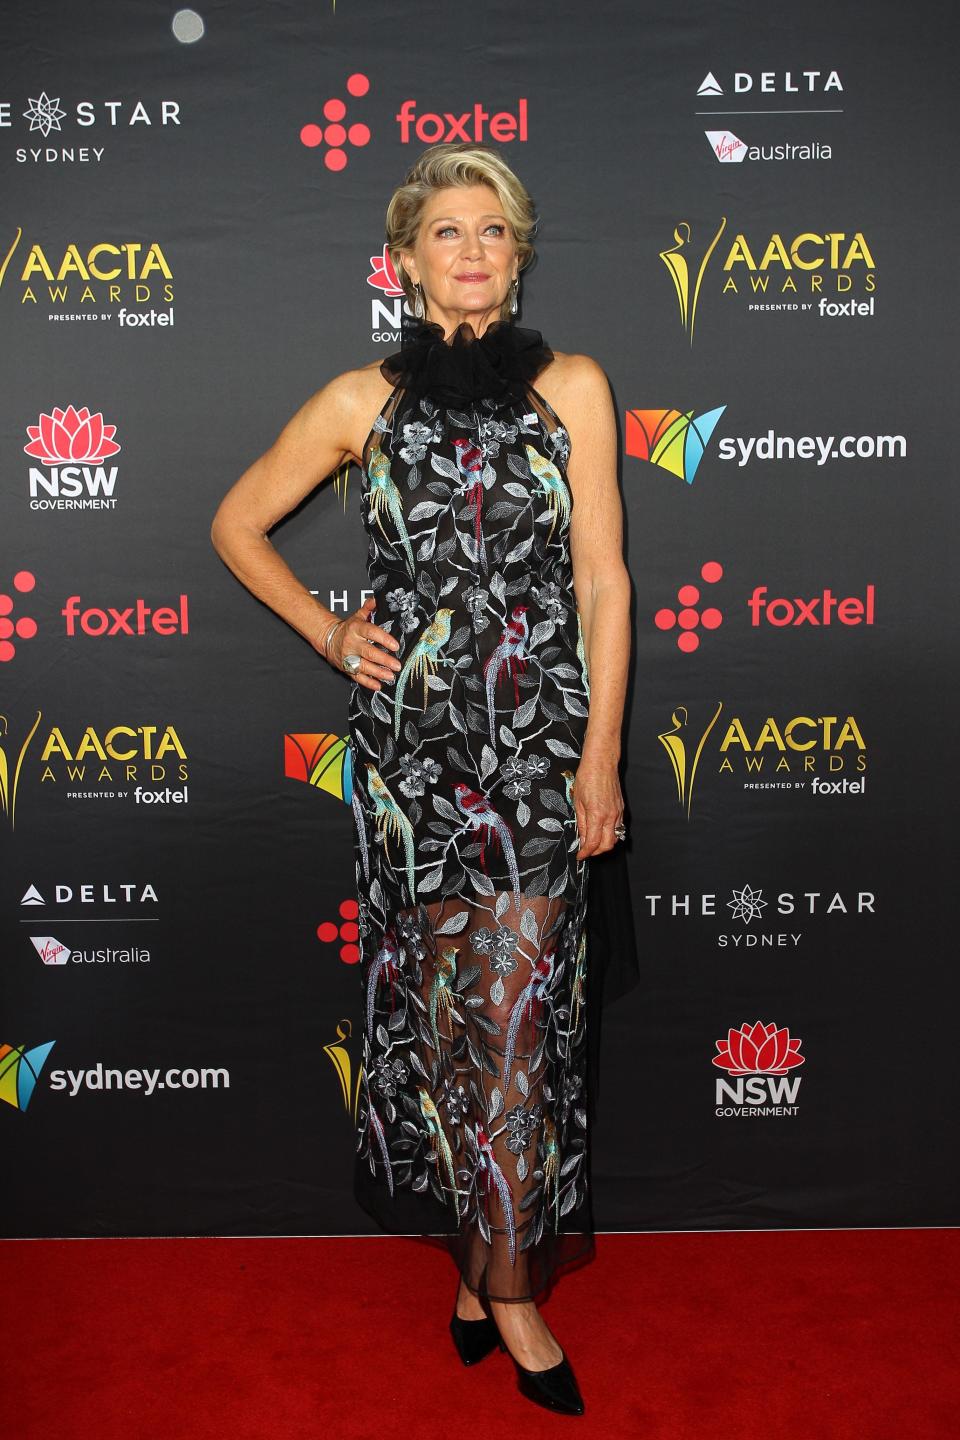 Sophie Monk and Simon Baker bring plenty of glam to AACTAs red carpet